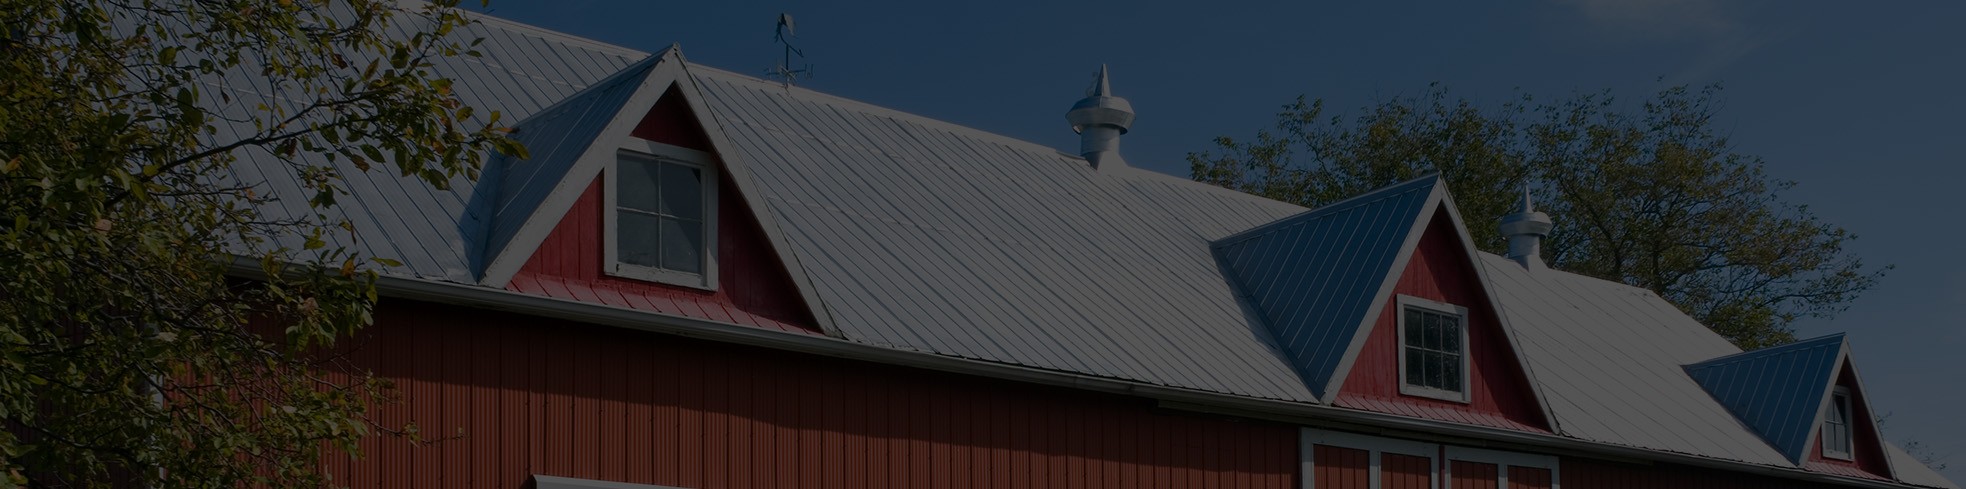 Barn Roof installation and repair